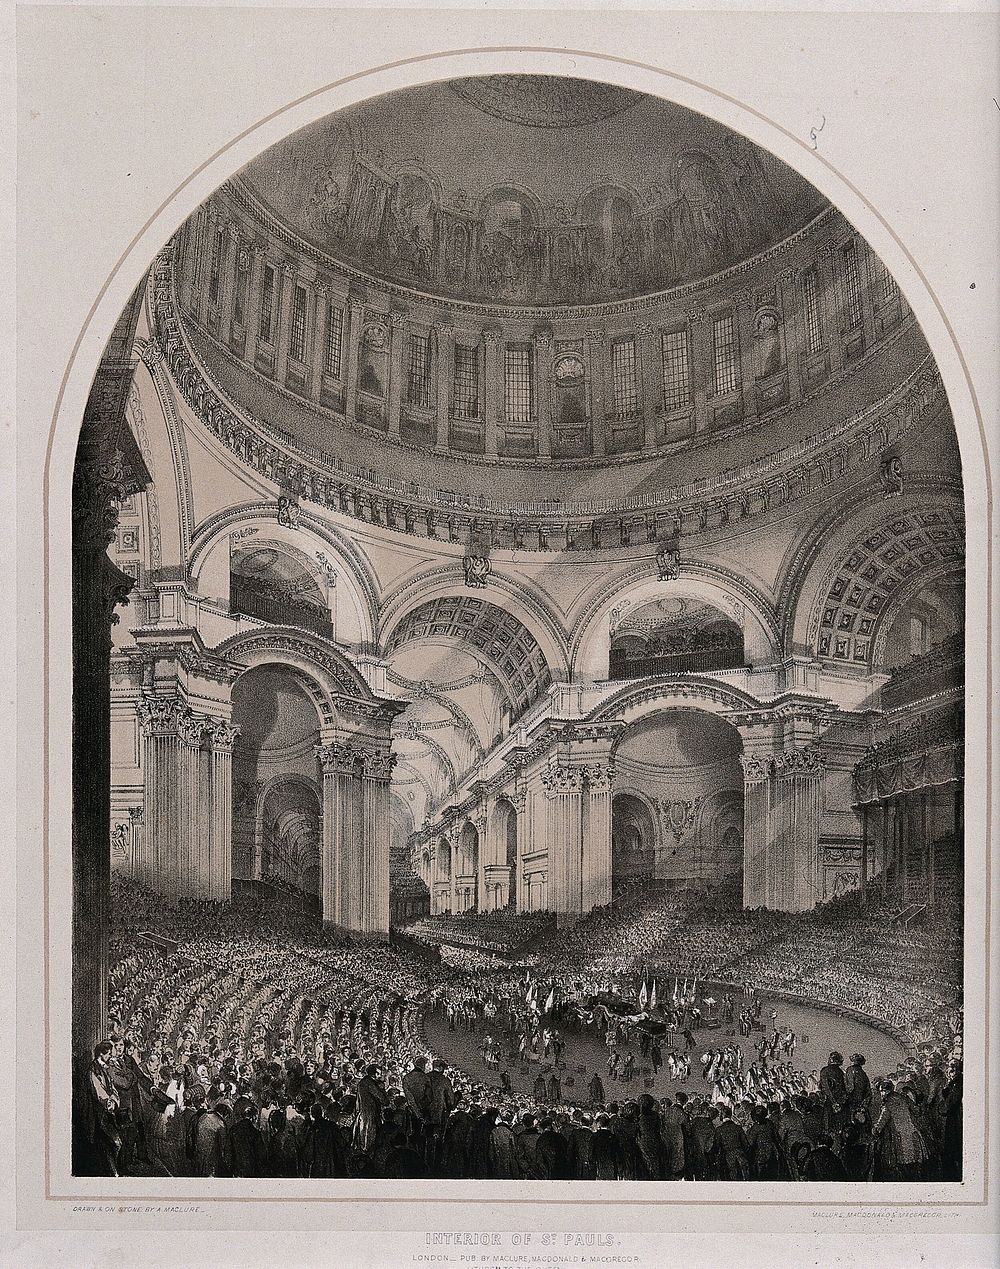 The funeral of the Duke of Wellington in St. Paul's Cathedral in London in 1852. Lithograph by A. Maclure.